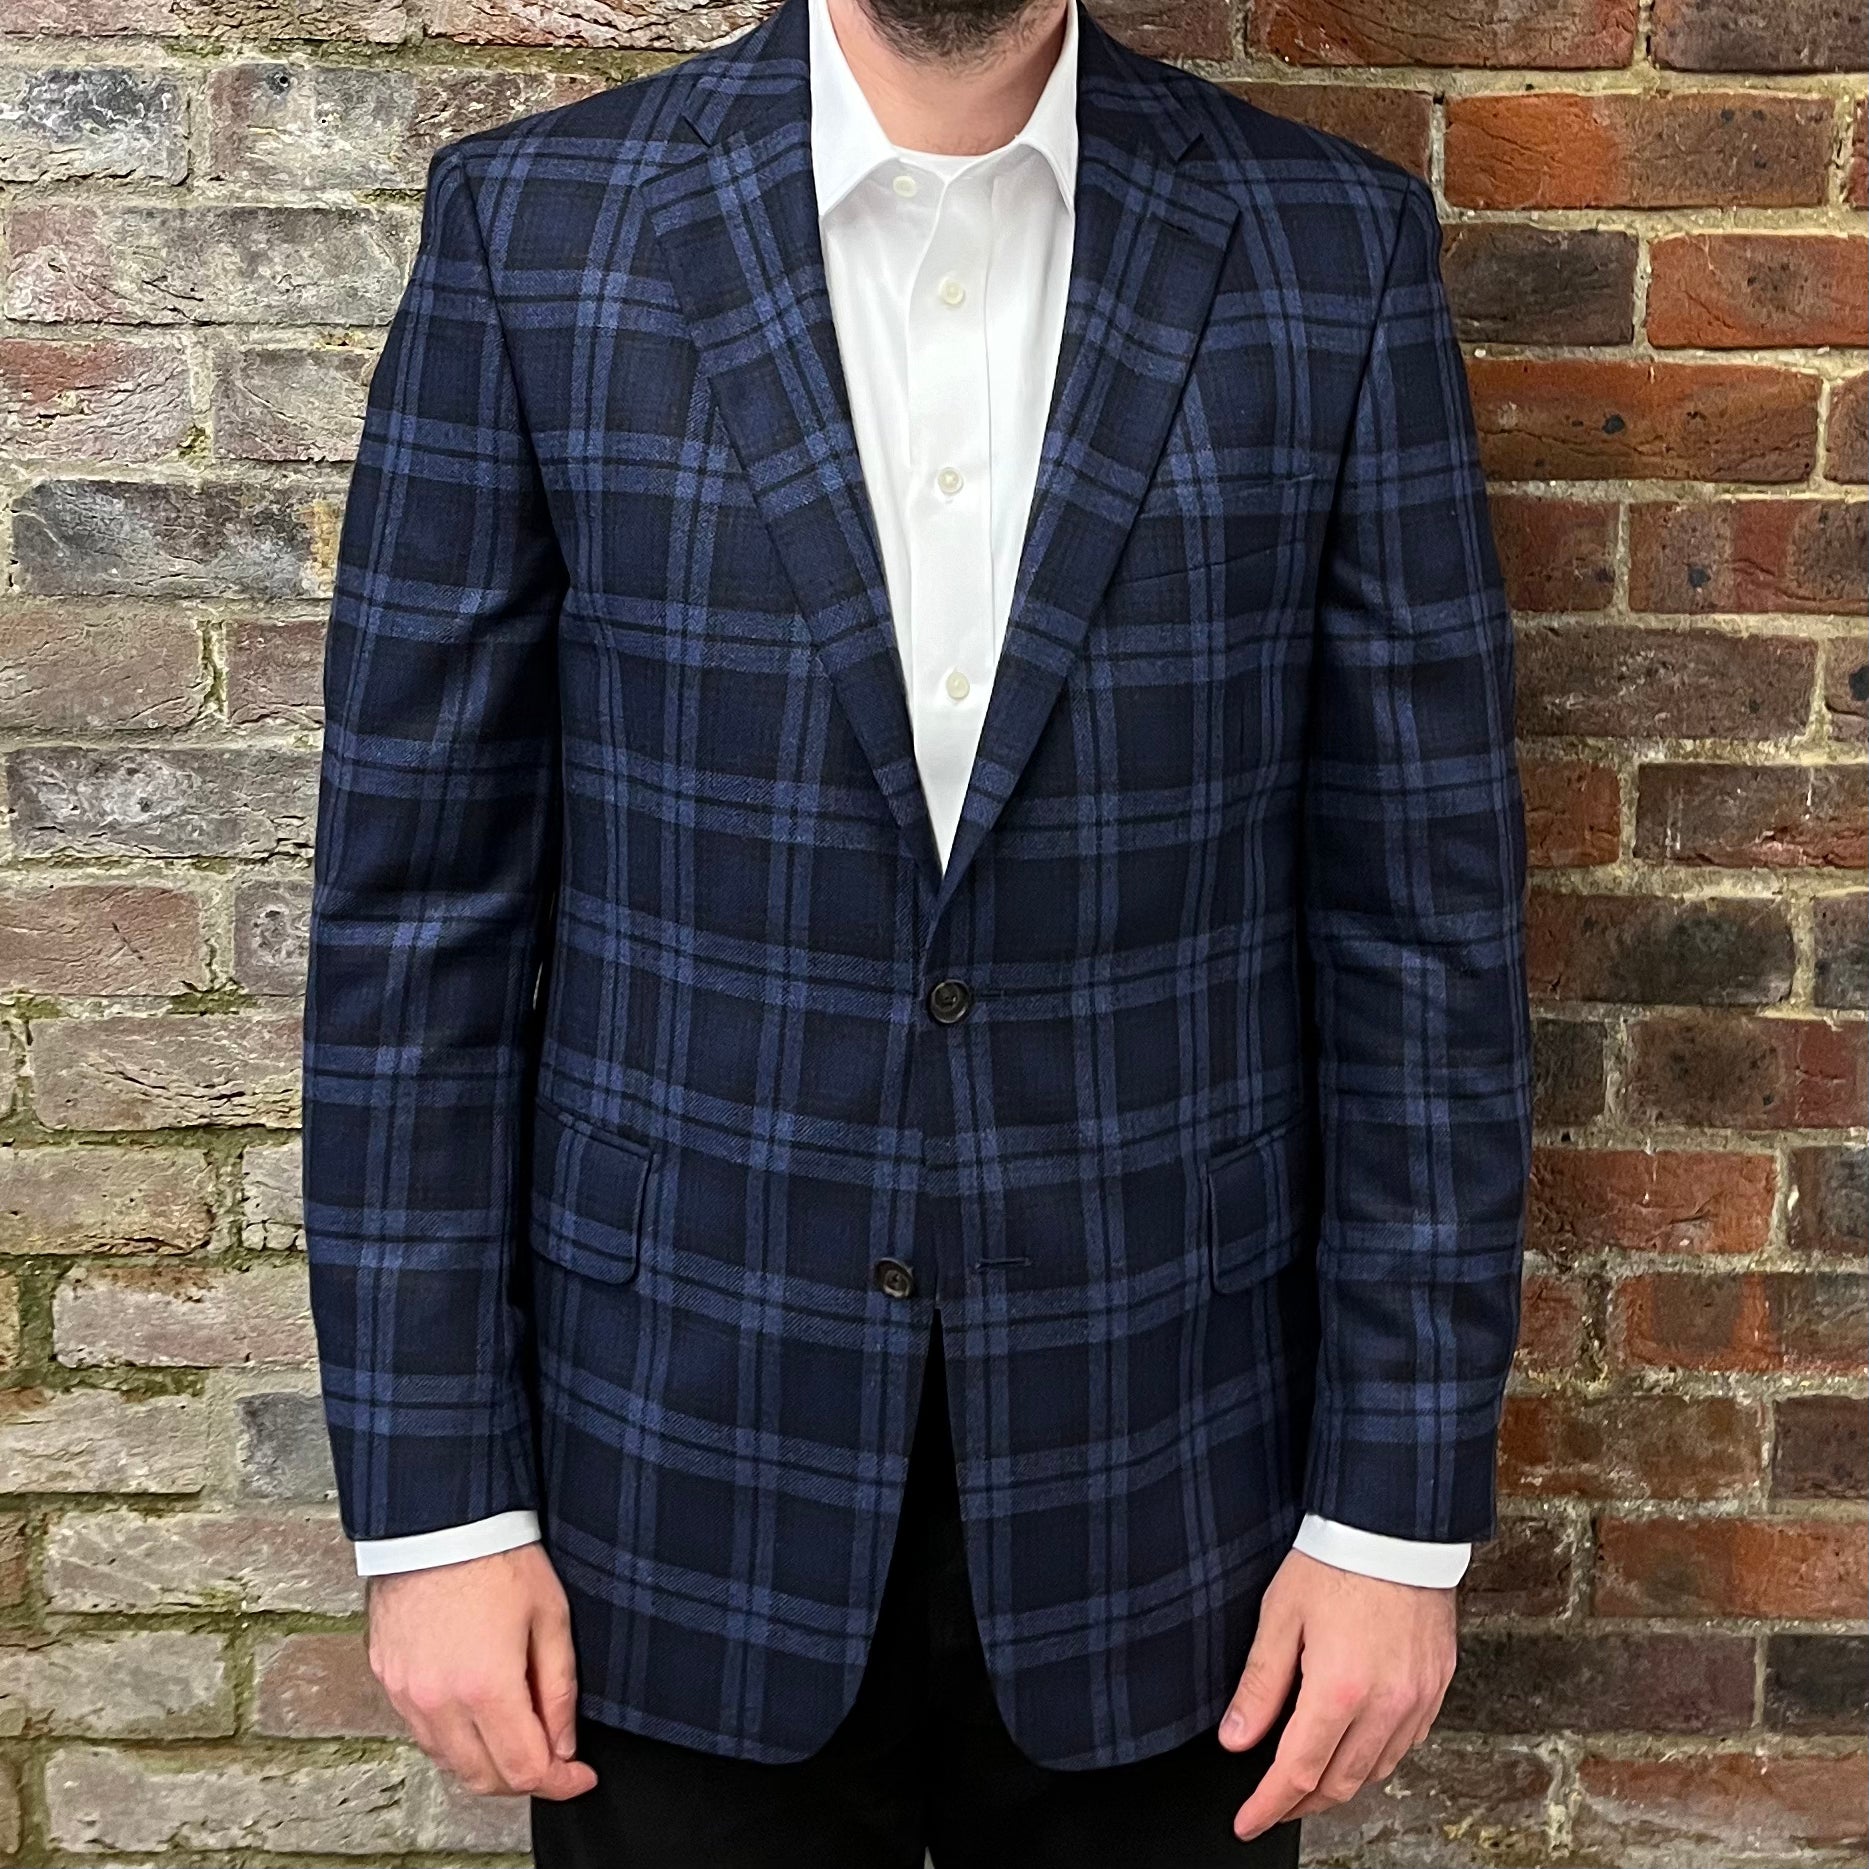 Regent 'The Toad' Jacket - Navy with Light Blue and Black Overcheck